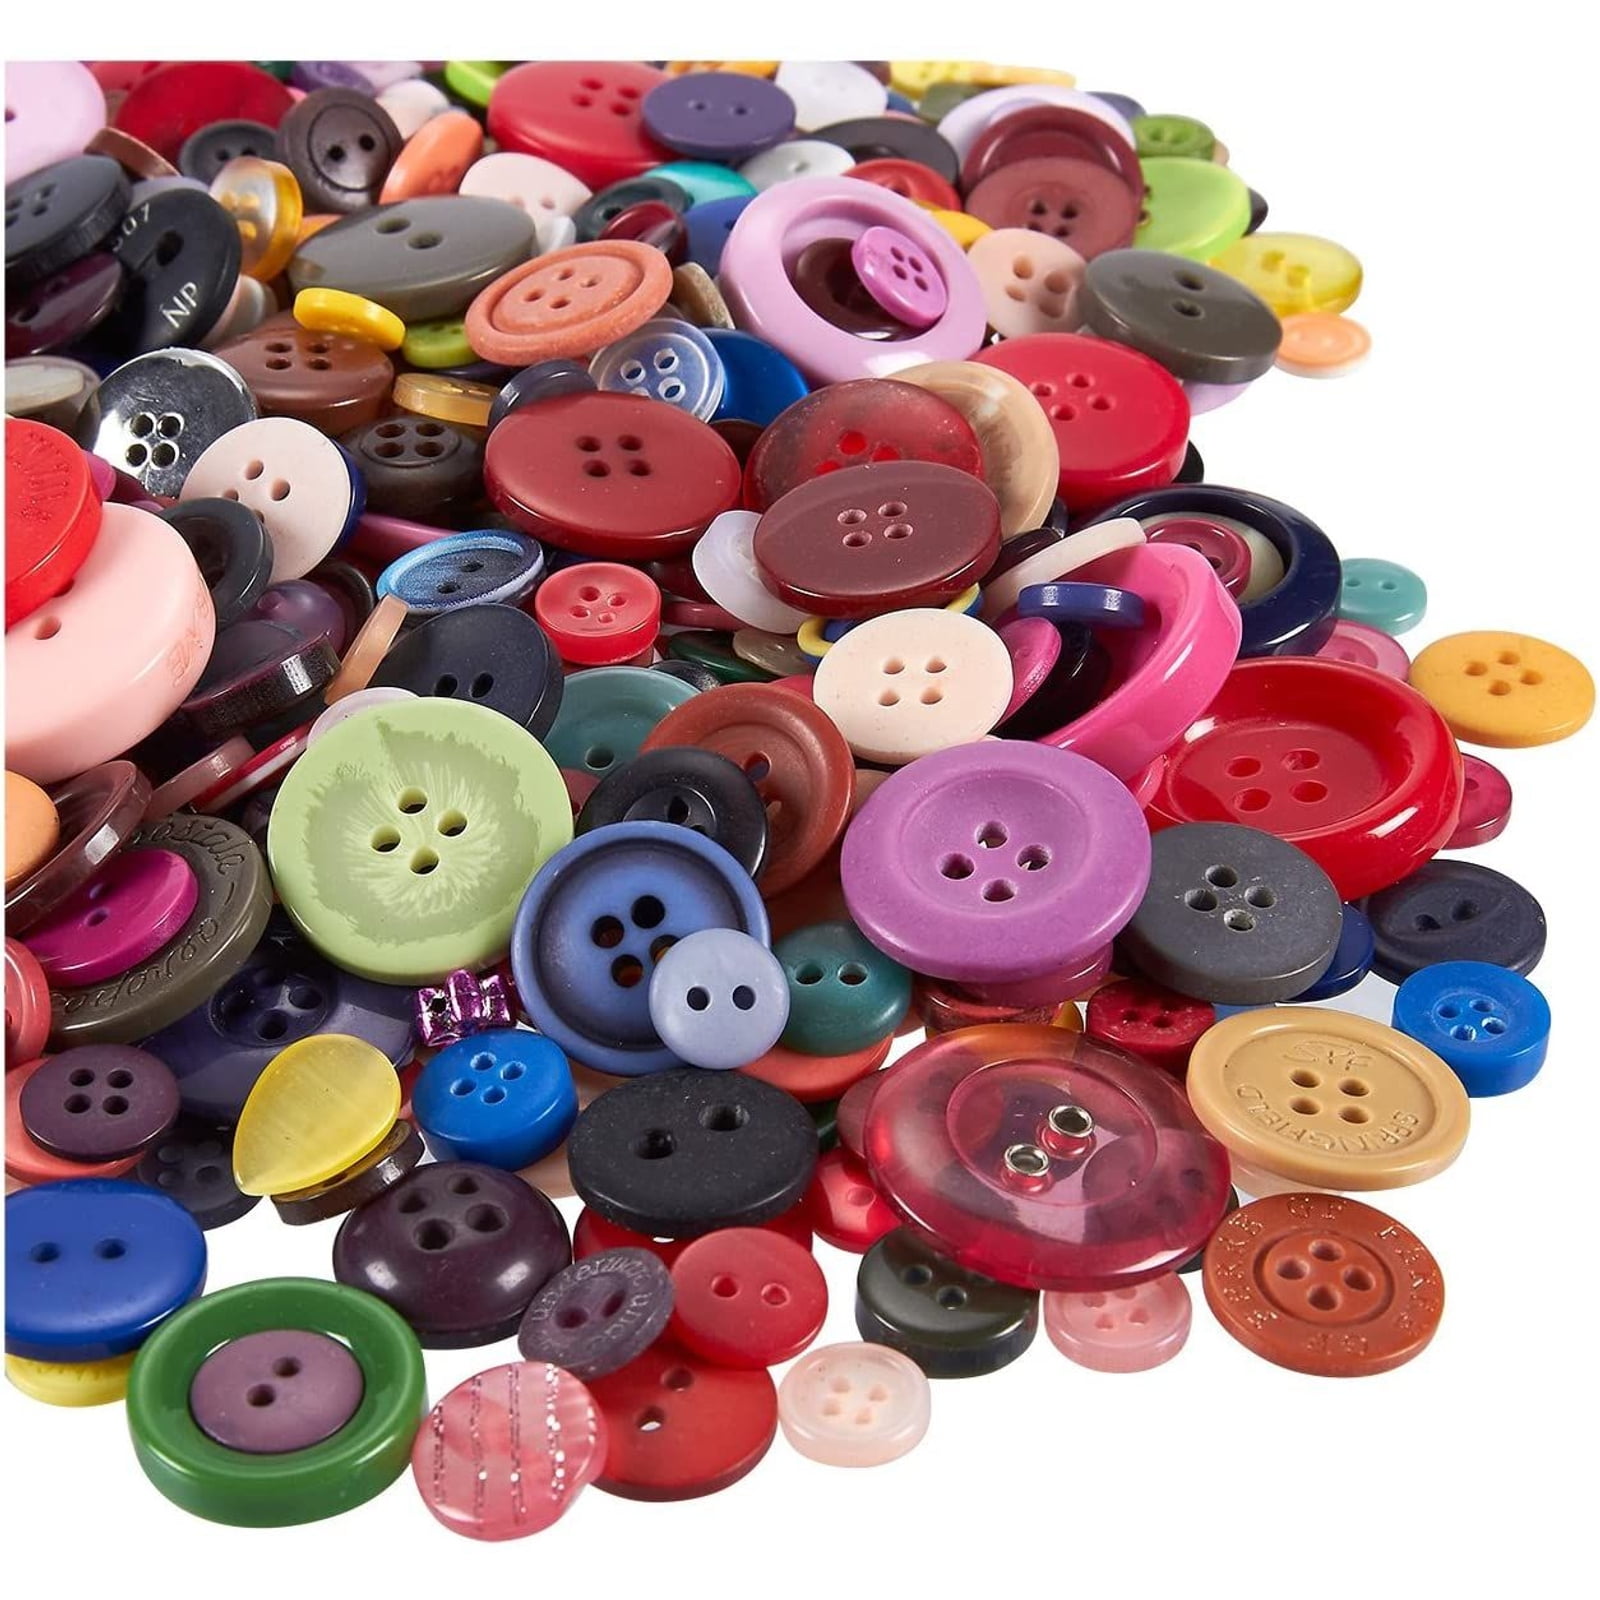 180 Pieces Colorful Buttons, 20mm Round Resin Buttons for Sewing and  Crafting, 12 Colors Large Buttons with Storage Box for Sewing, Knitting